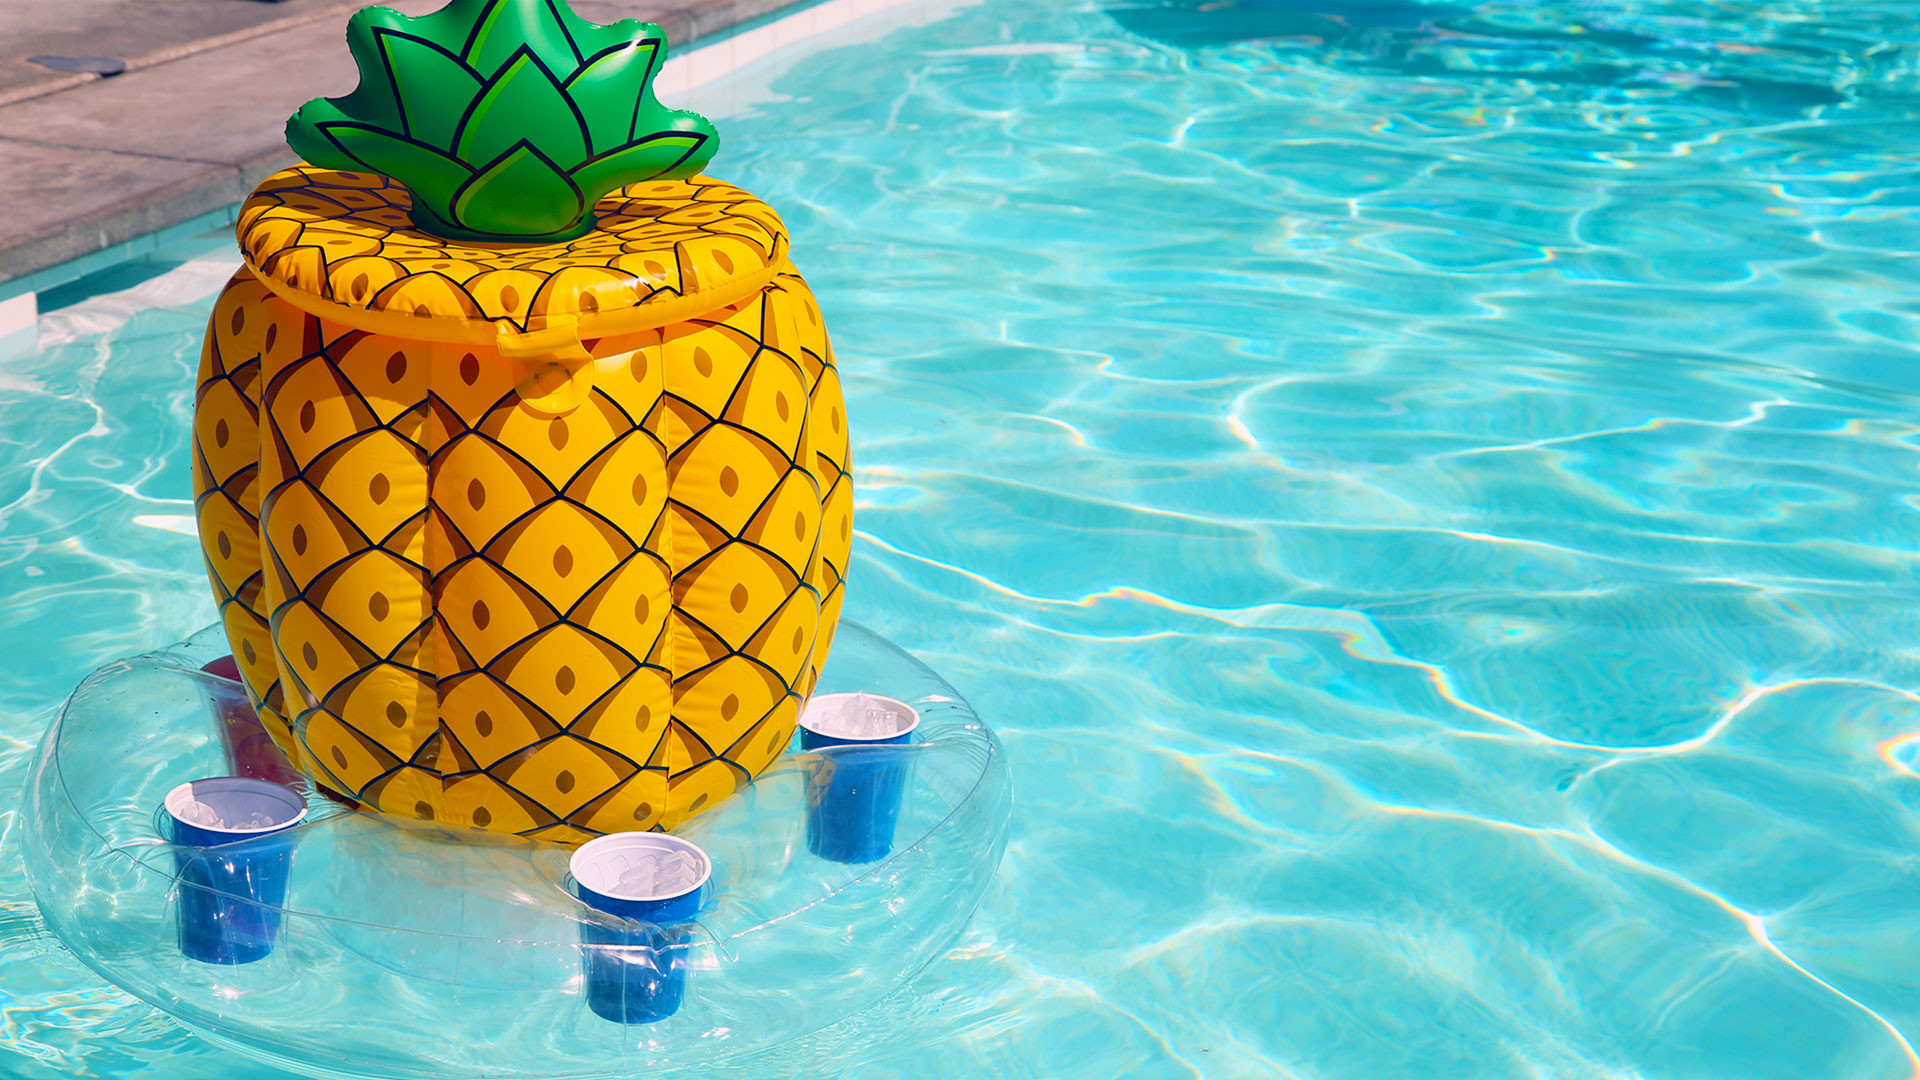 1920x1080 7. An Inflatable Cooler to Keep Your Drinks Chill